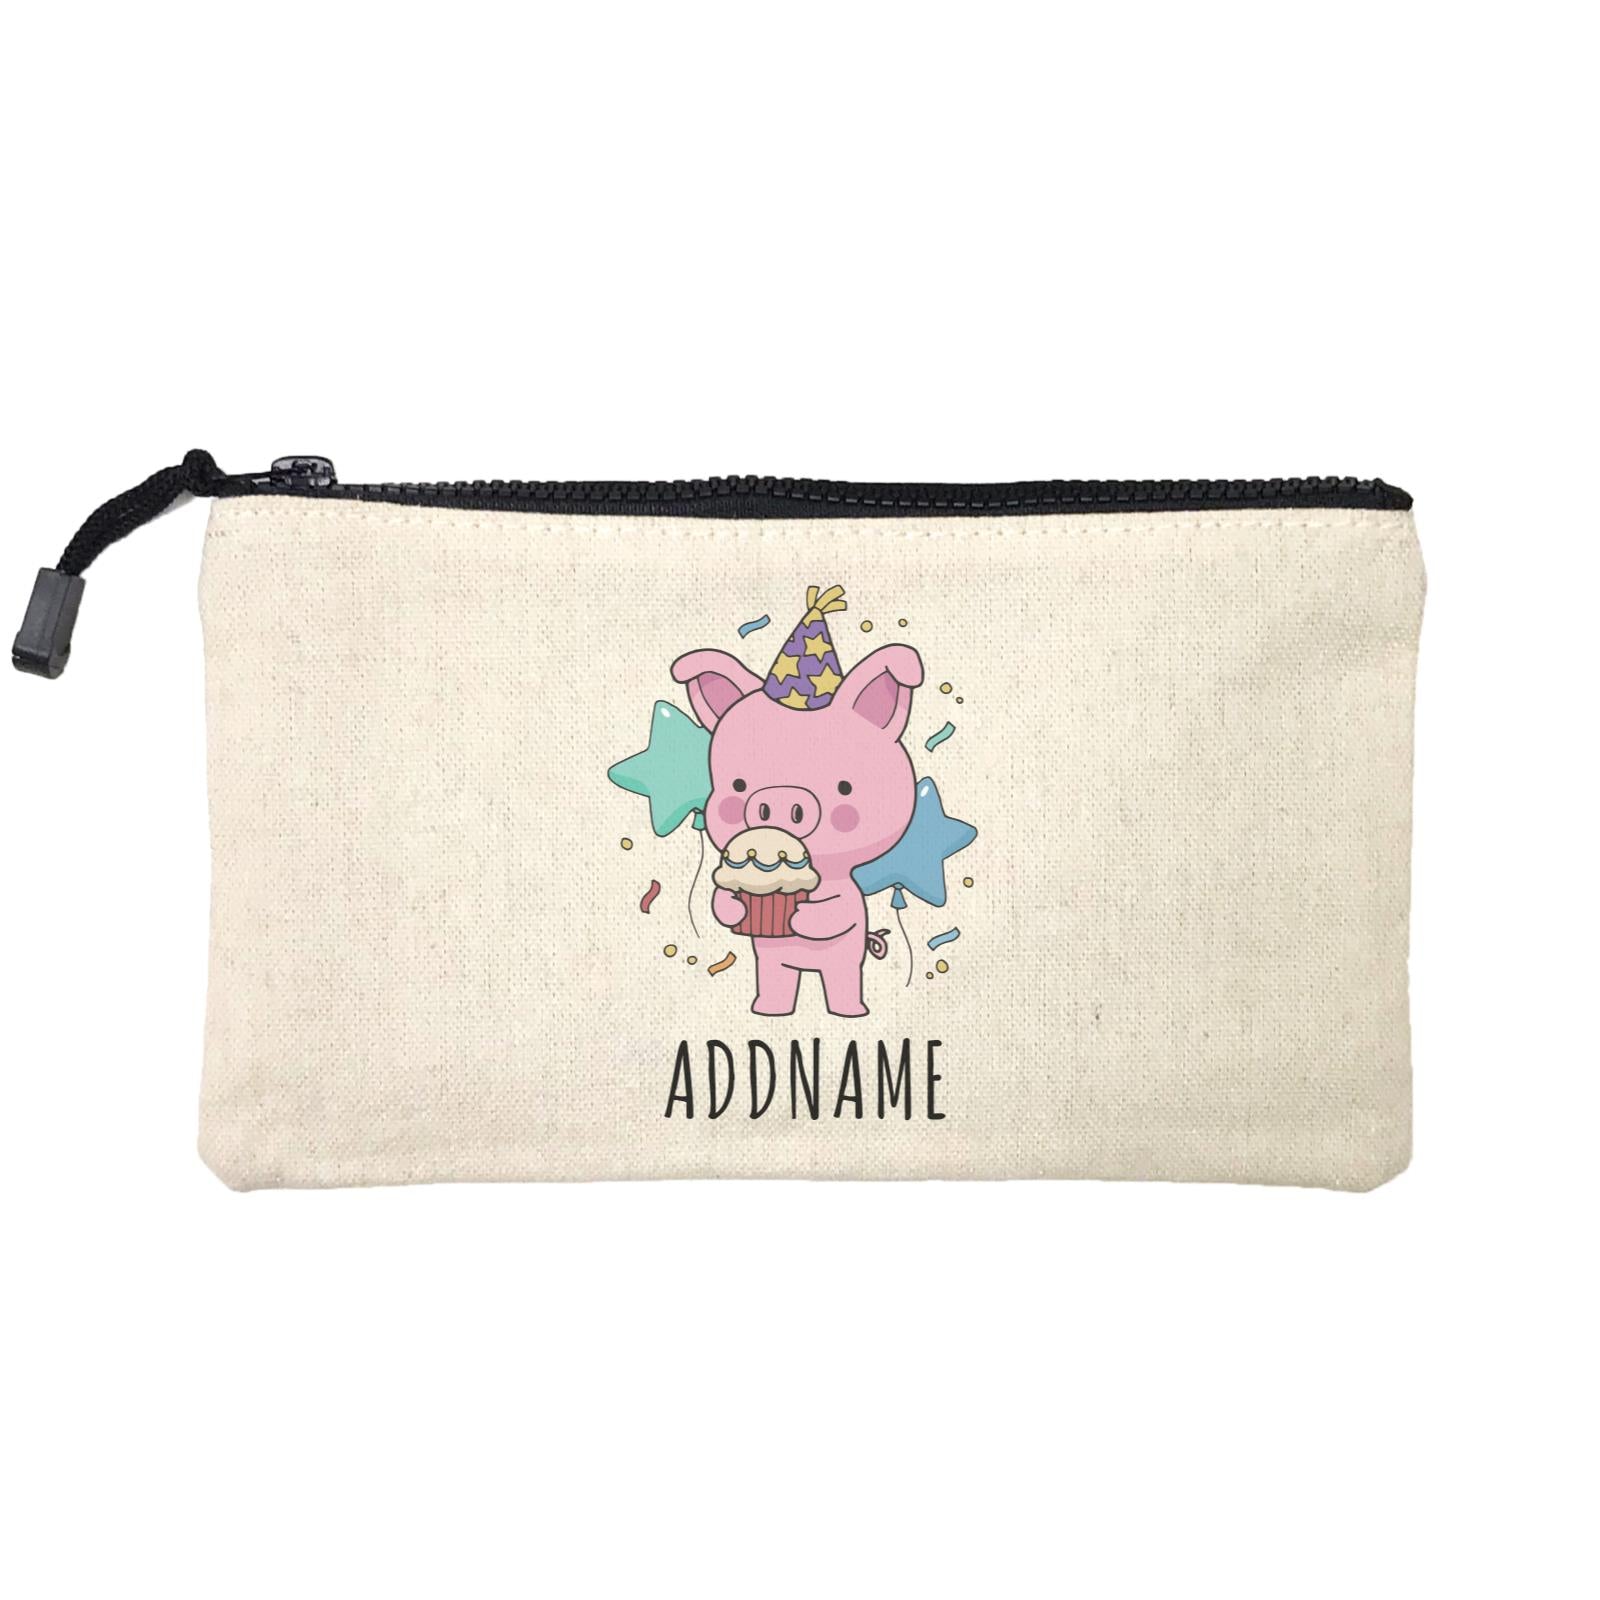 Birthday Sketch Animals Pig with Party Hat Eating Cupcake Addname Mini Accessories Stationery Pouch